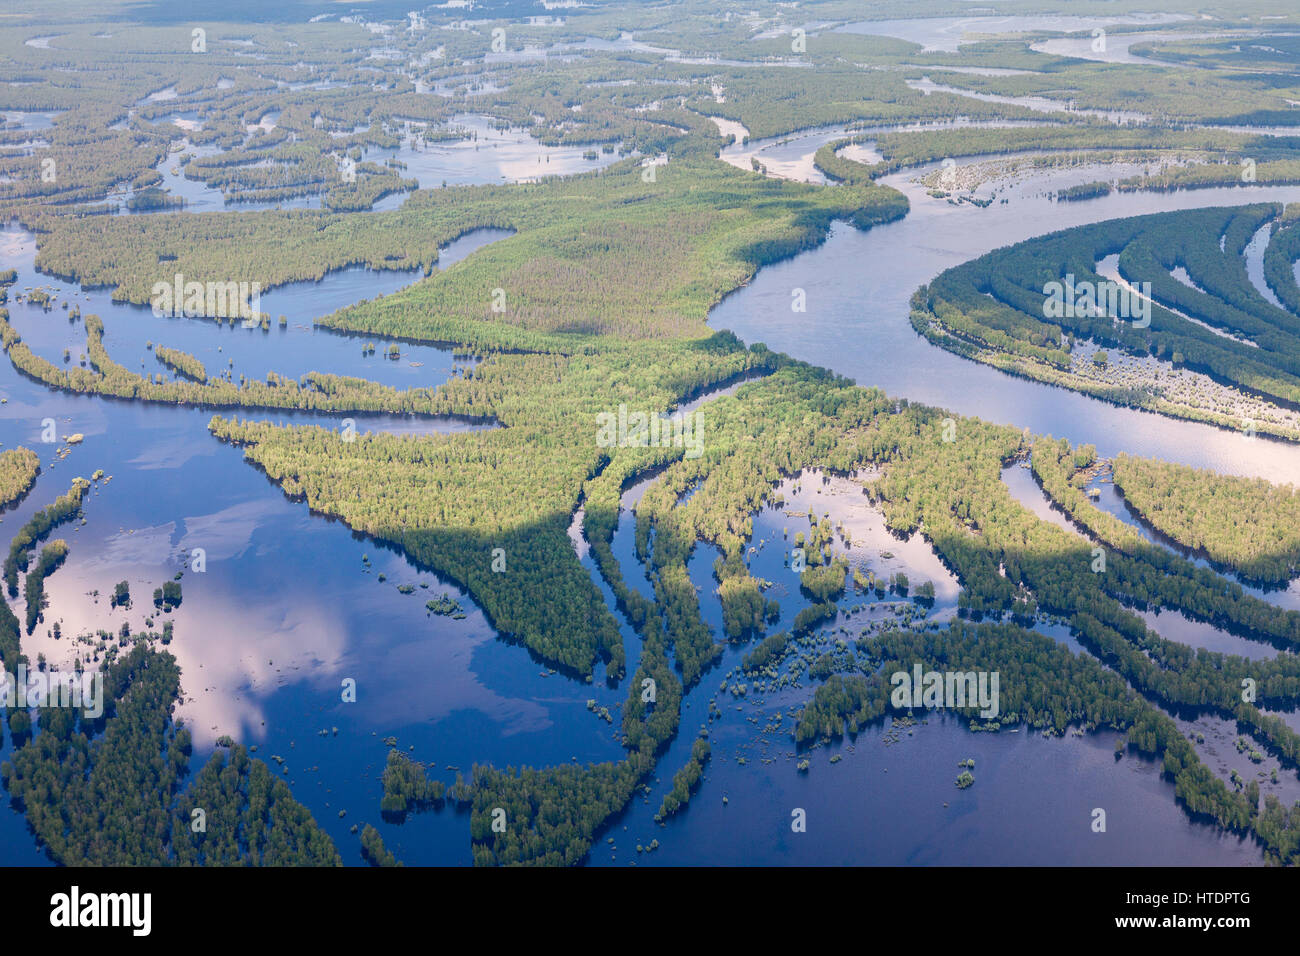 Aerial view flooded forest plains in summer. Stock Photo